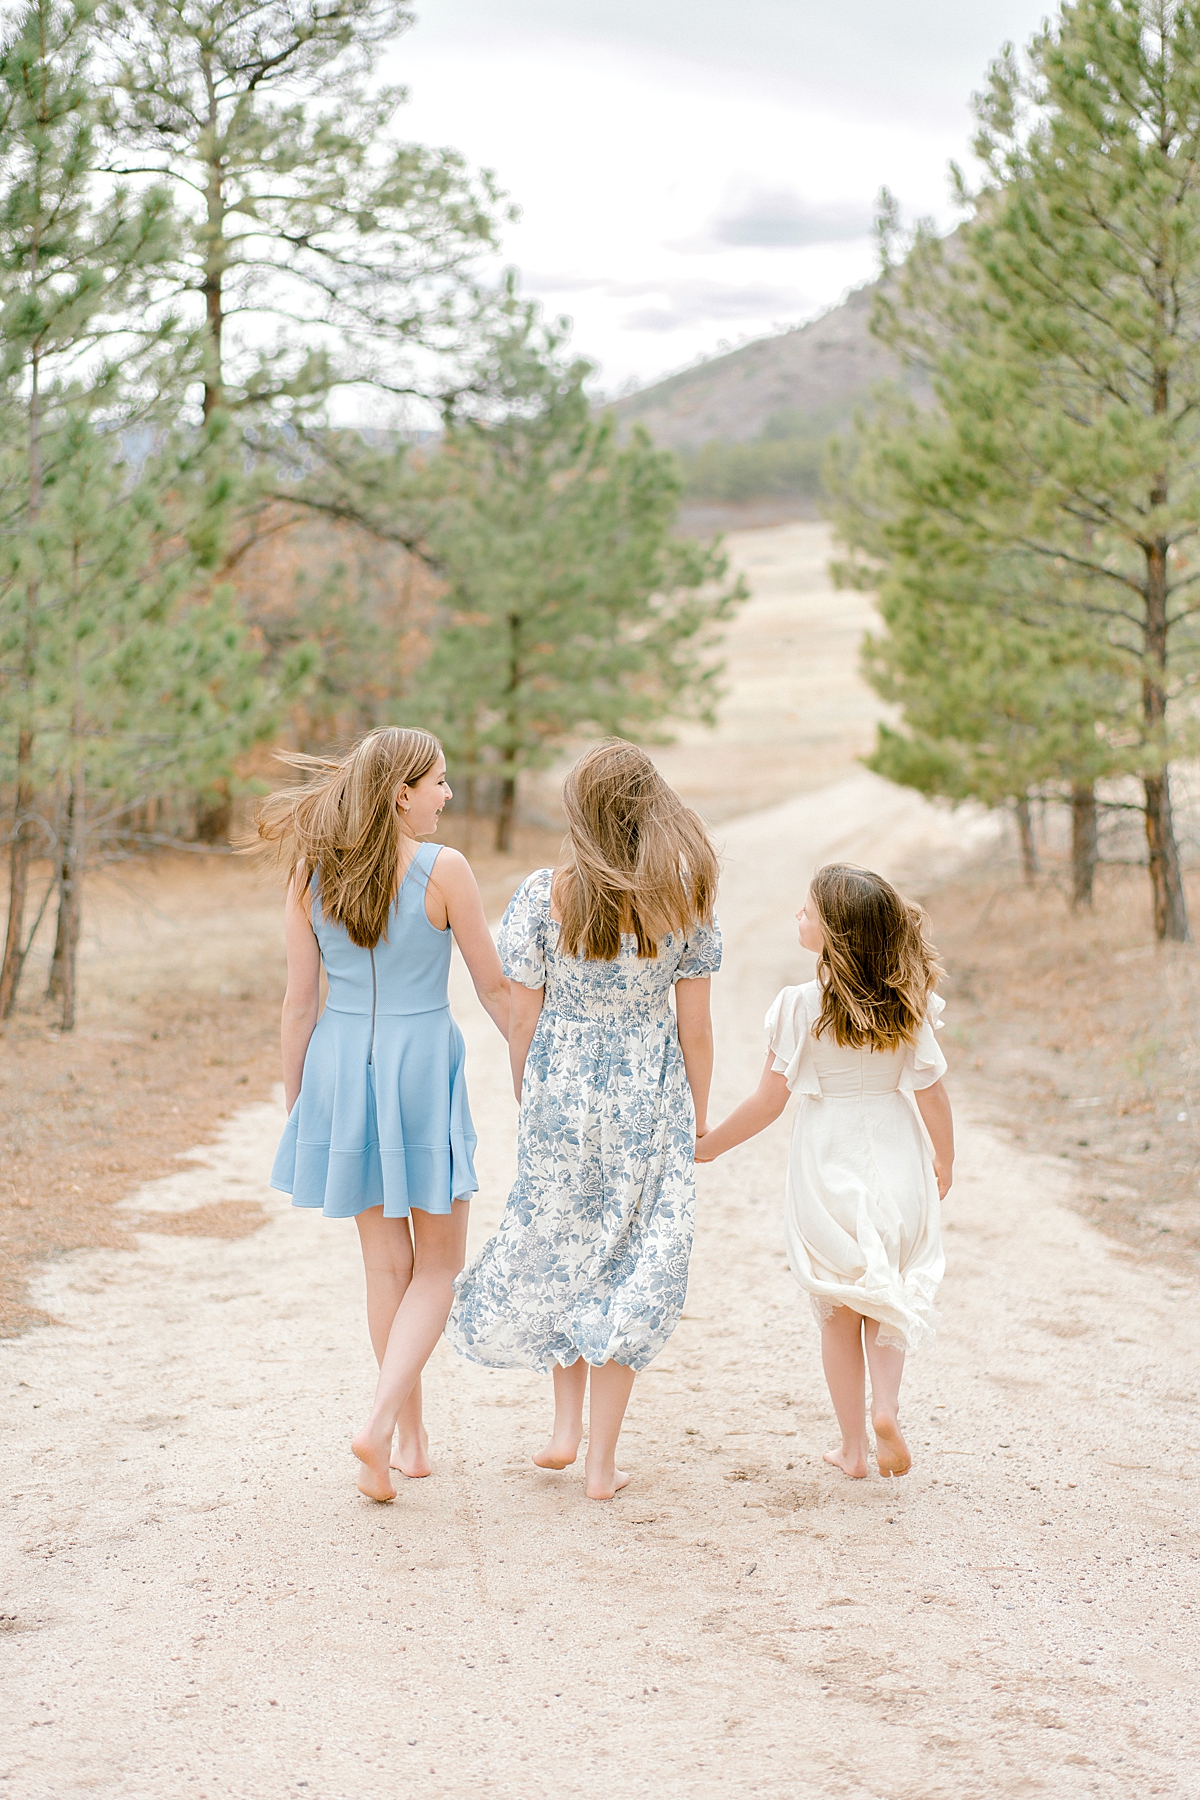 Three sisters walk hand-in-hand down a dirt path in Castle Rock.